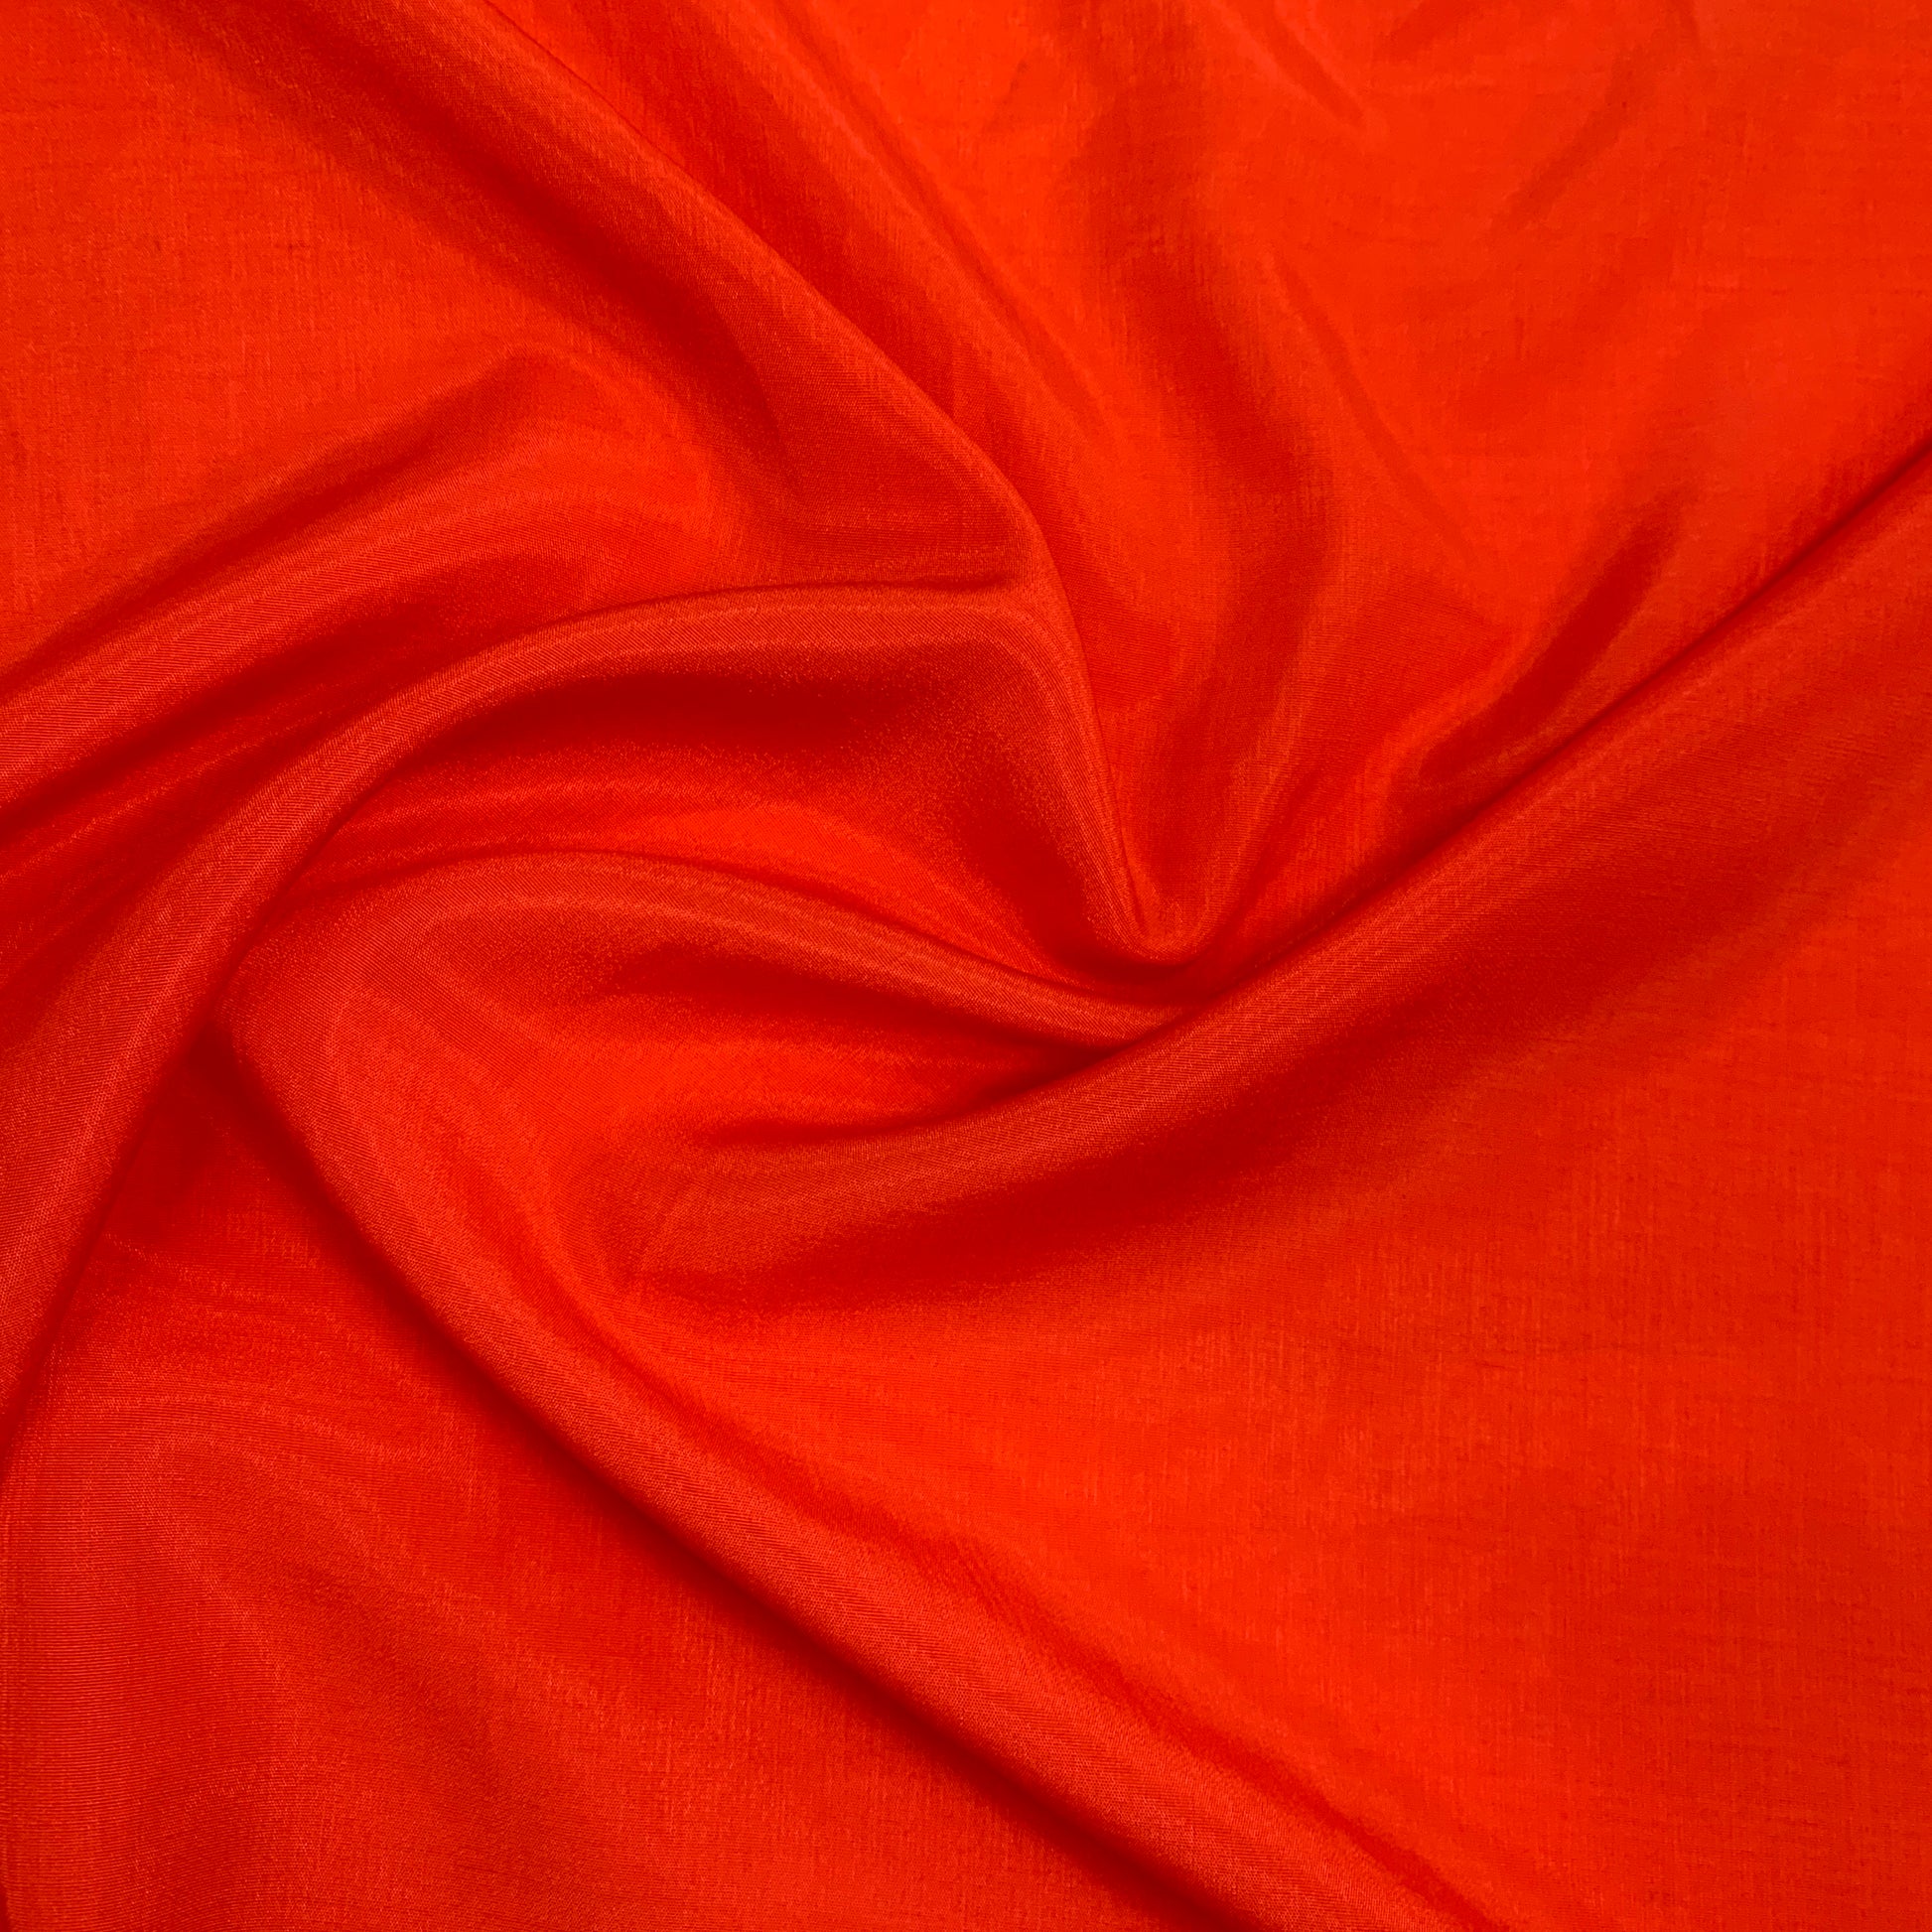 Presenting Linus a fire colored rayon and polyester blend with a sateen sheen